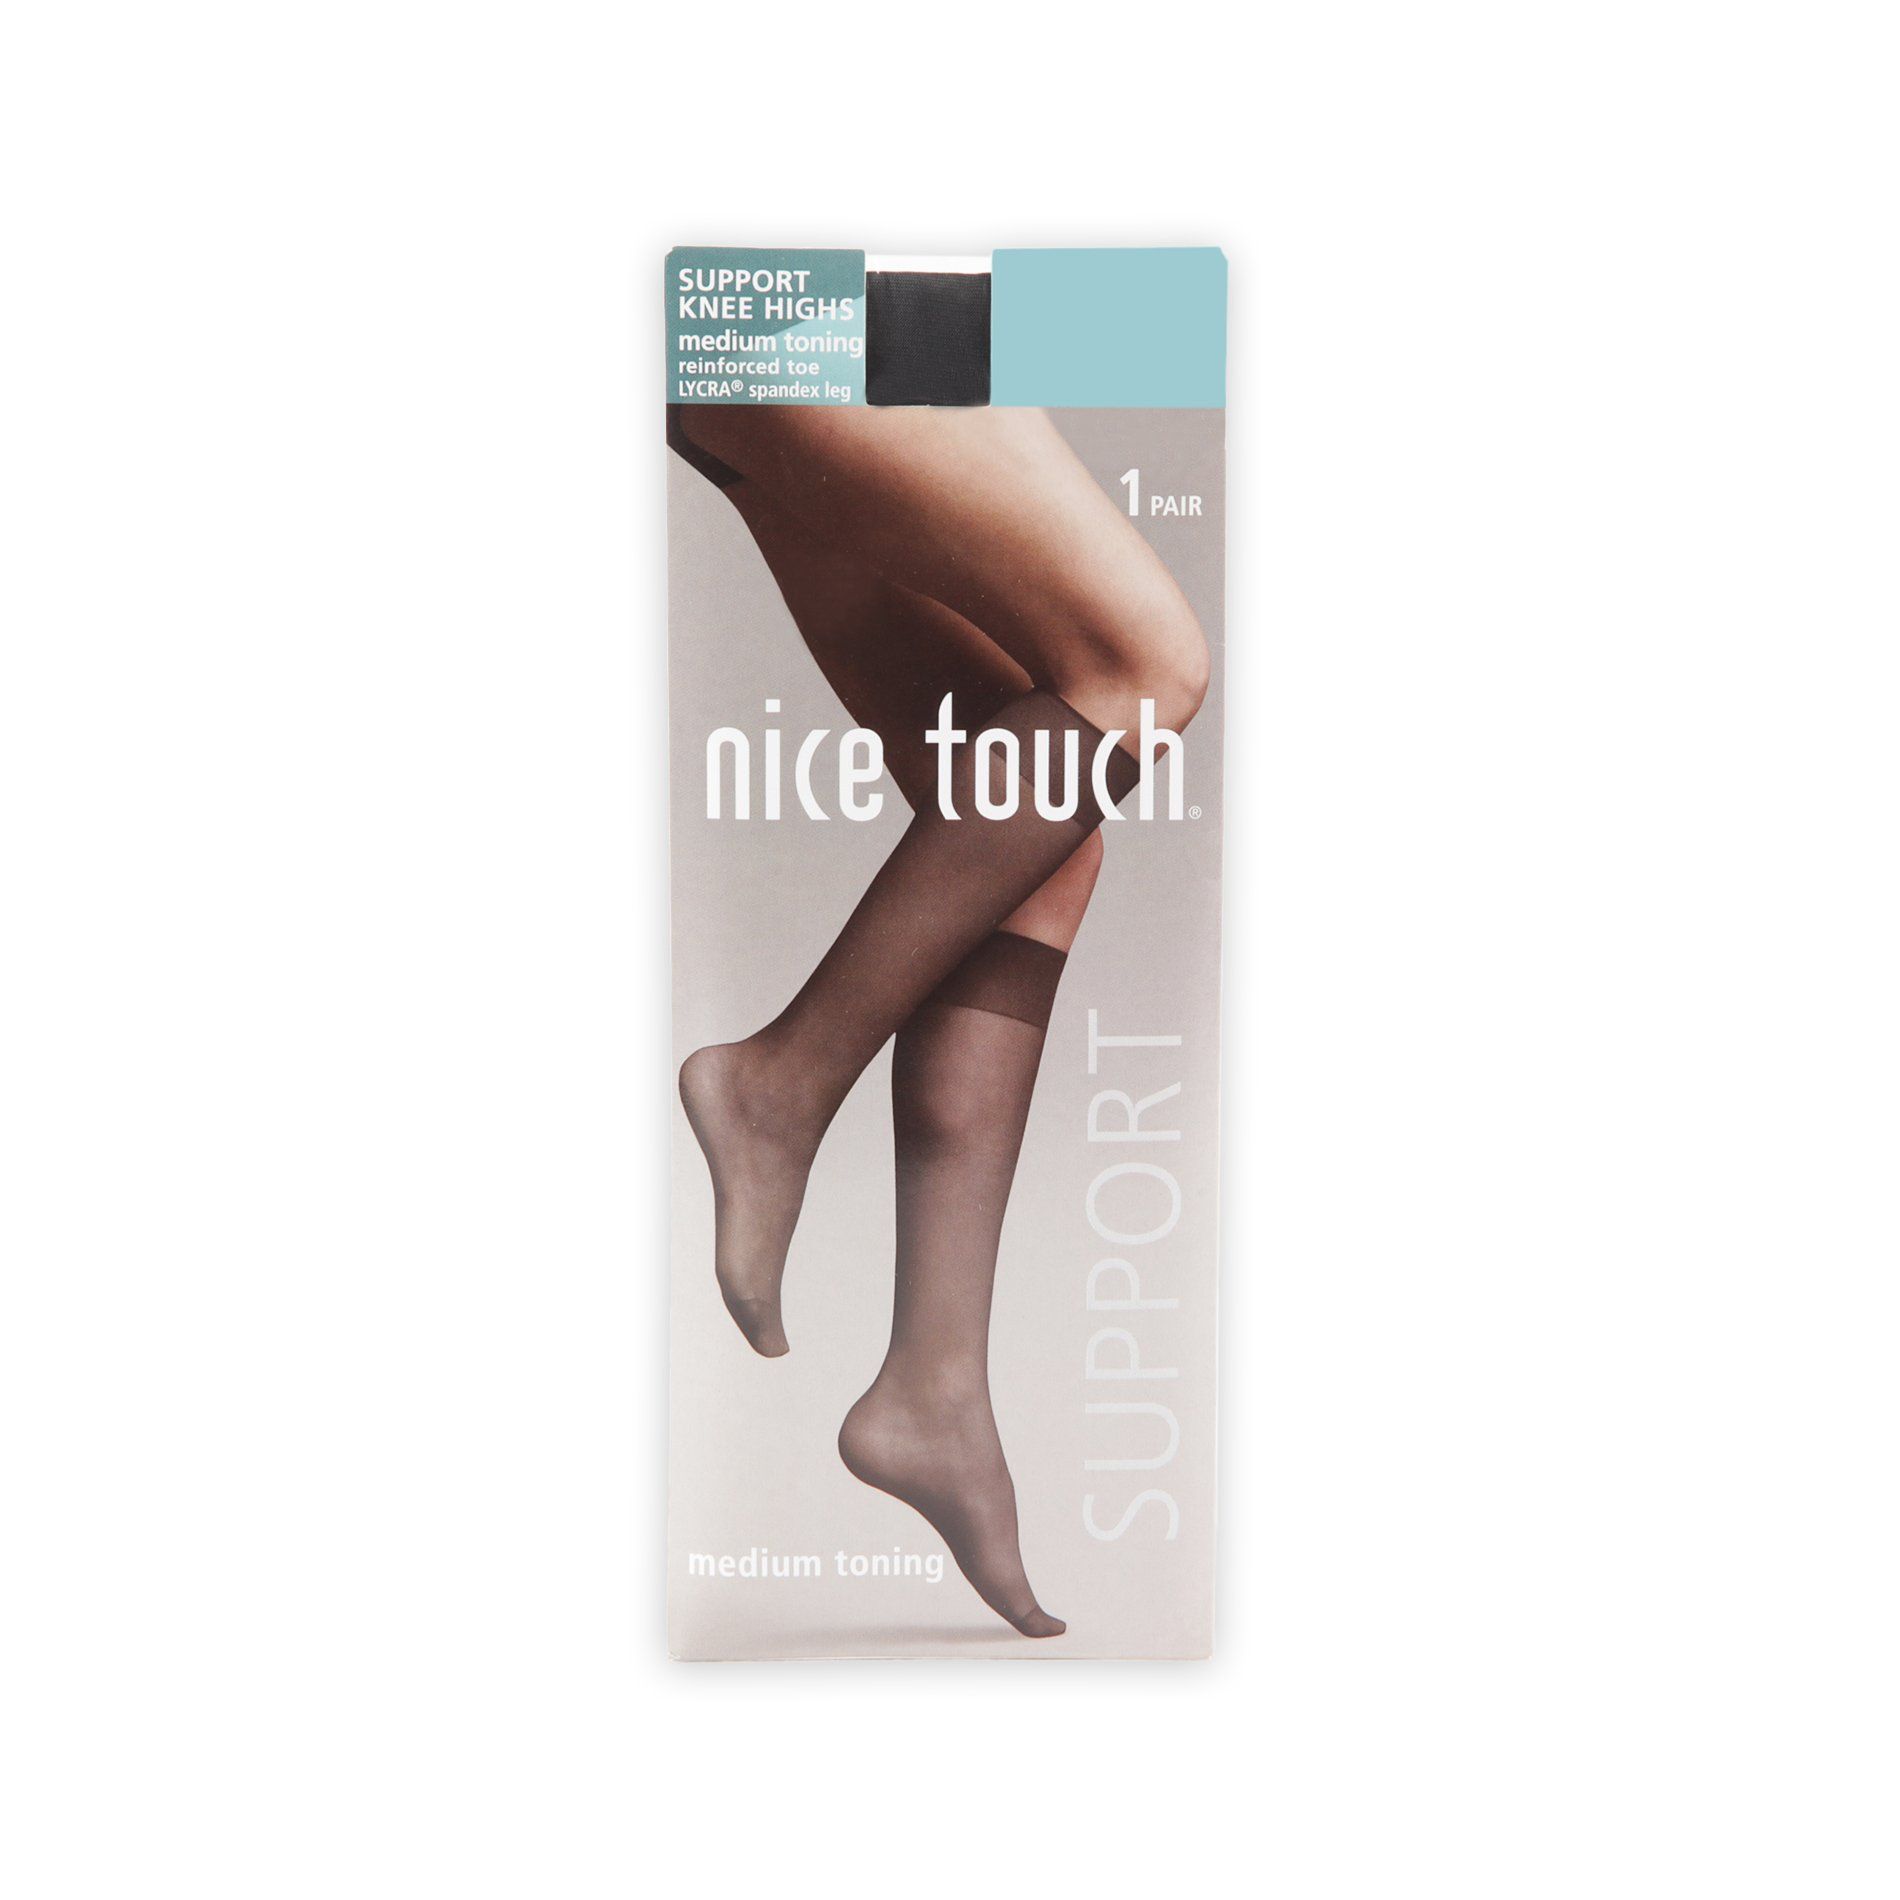 Air R. reccomend Nice touch pantyhose size chart